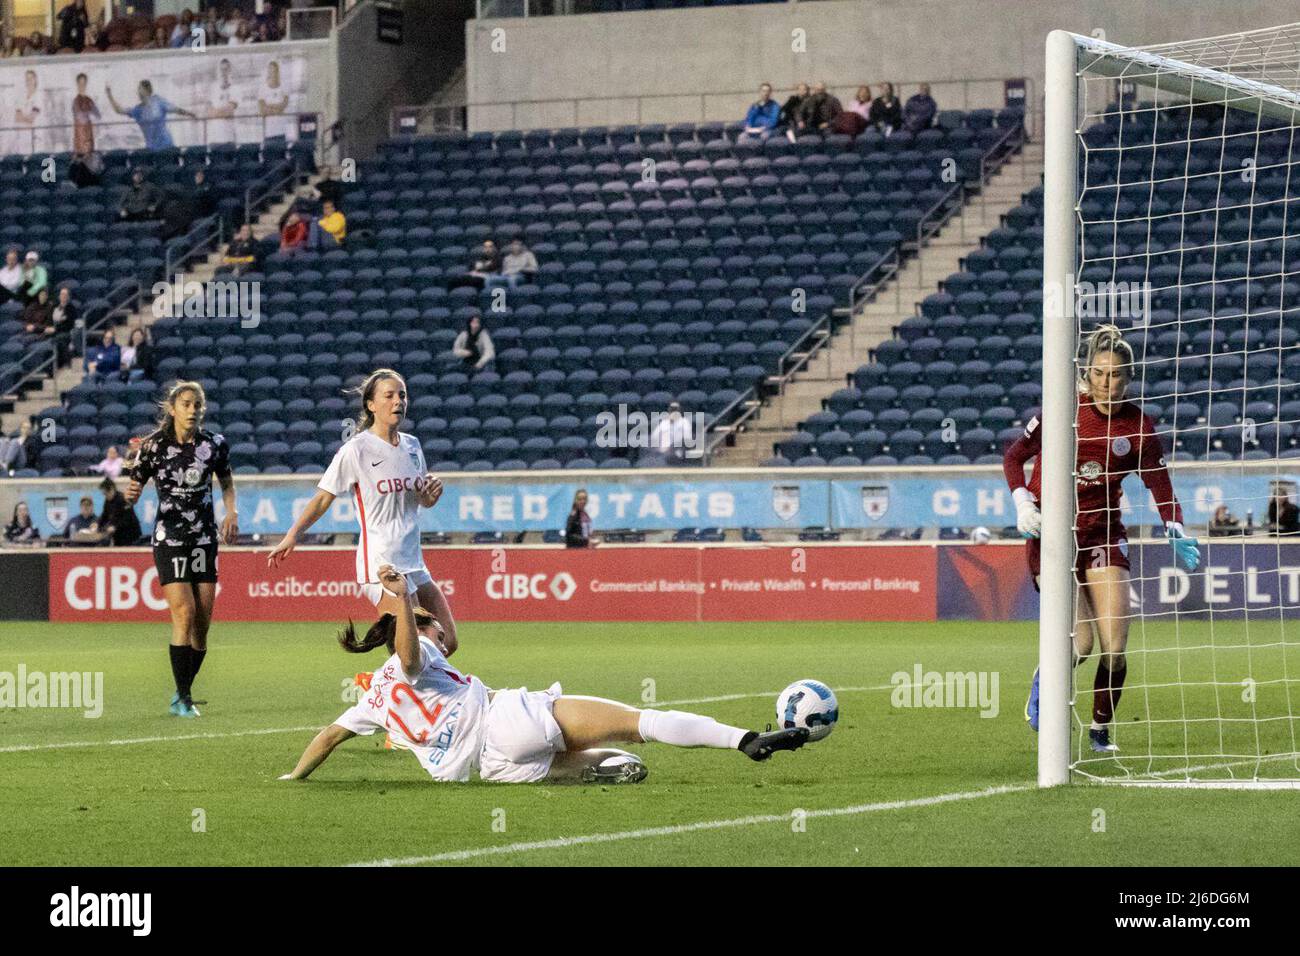 Bianca St-Georges 22 Chicago Red Stars) scores the second Chicago Red Strs goal during the gamel v Racing Louisville FC on Saturday April 30, 2022 at the Seat Geek stadium, Bridgeview, USA. (No commercial usage).  Shaina Benhiyoun/SPP Stock Photo